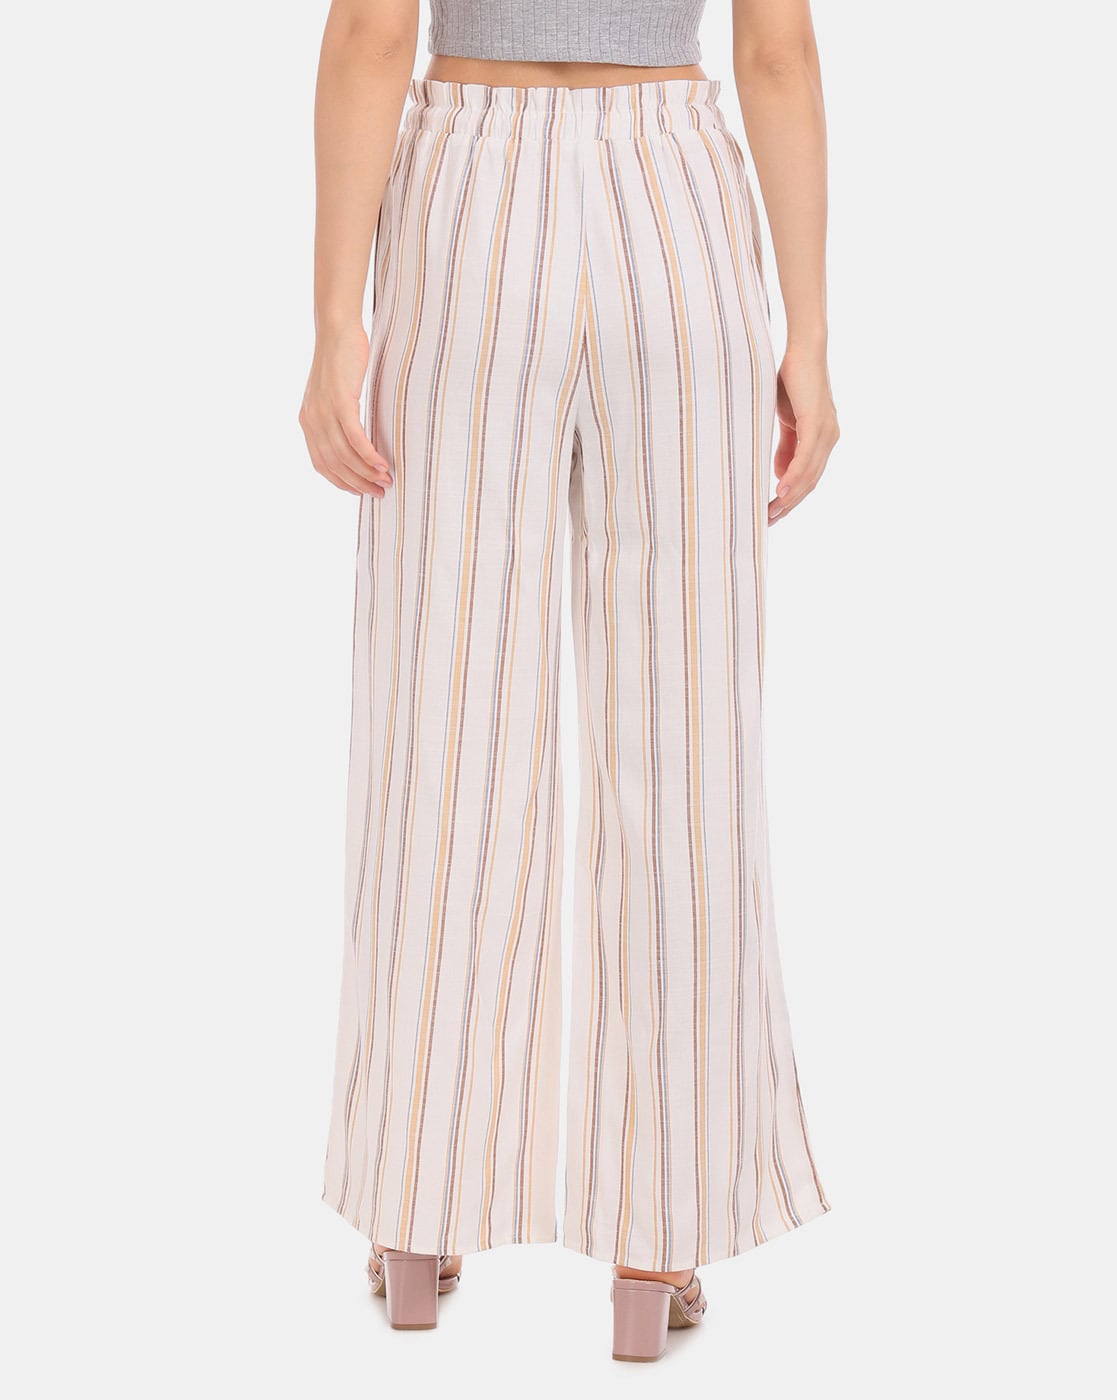 Shop Belted Striped Palazzo Pants for Women from latest collection at  Forever 21  385174